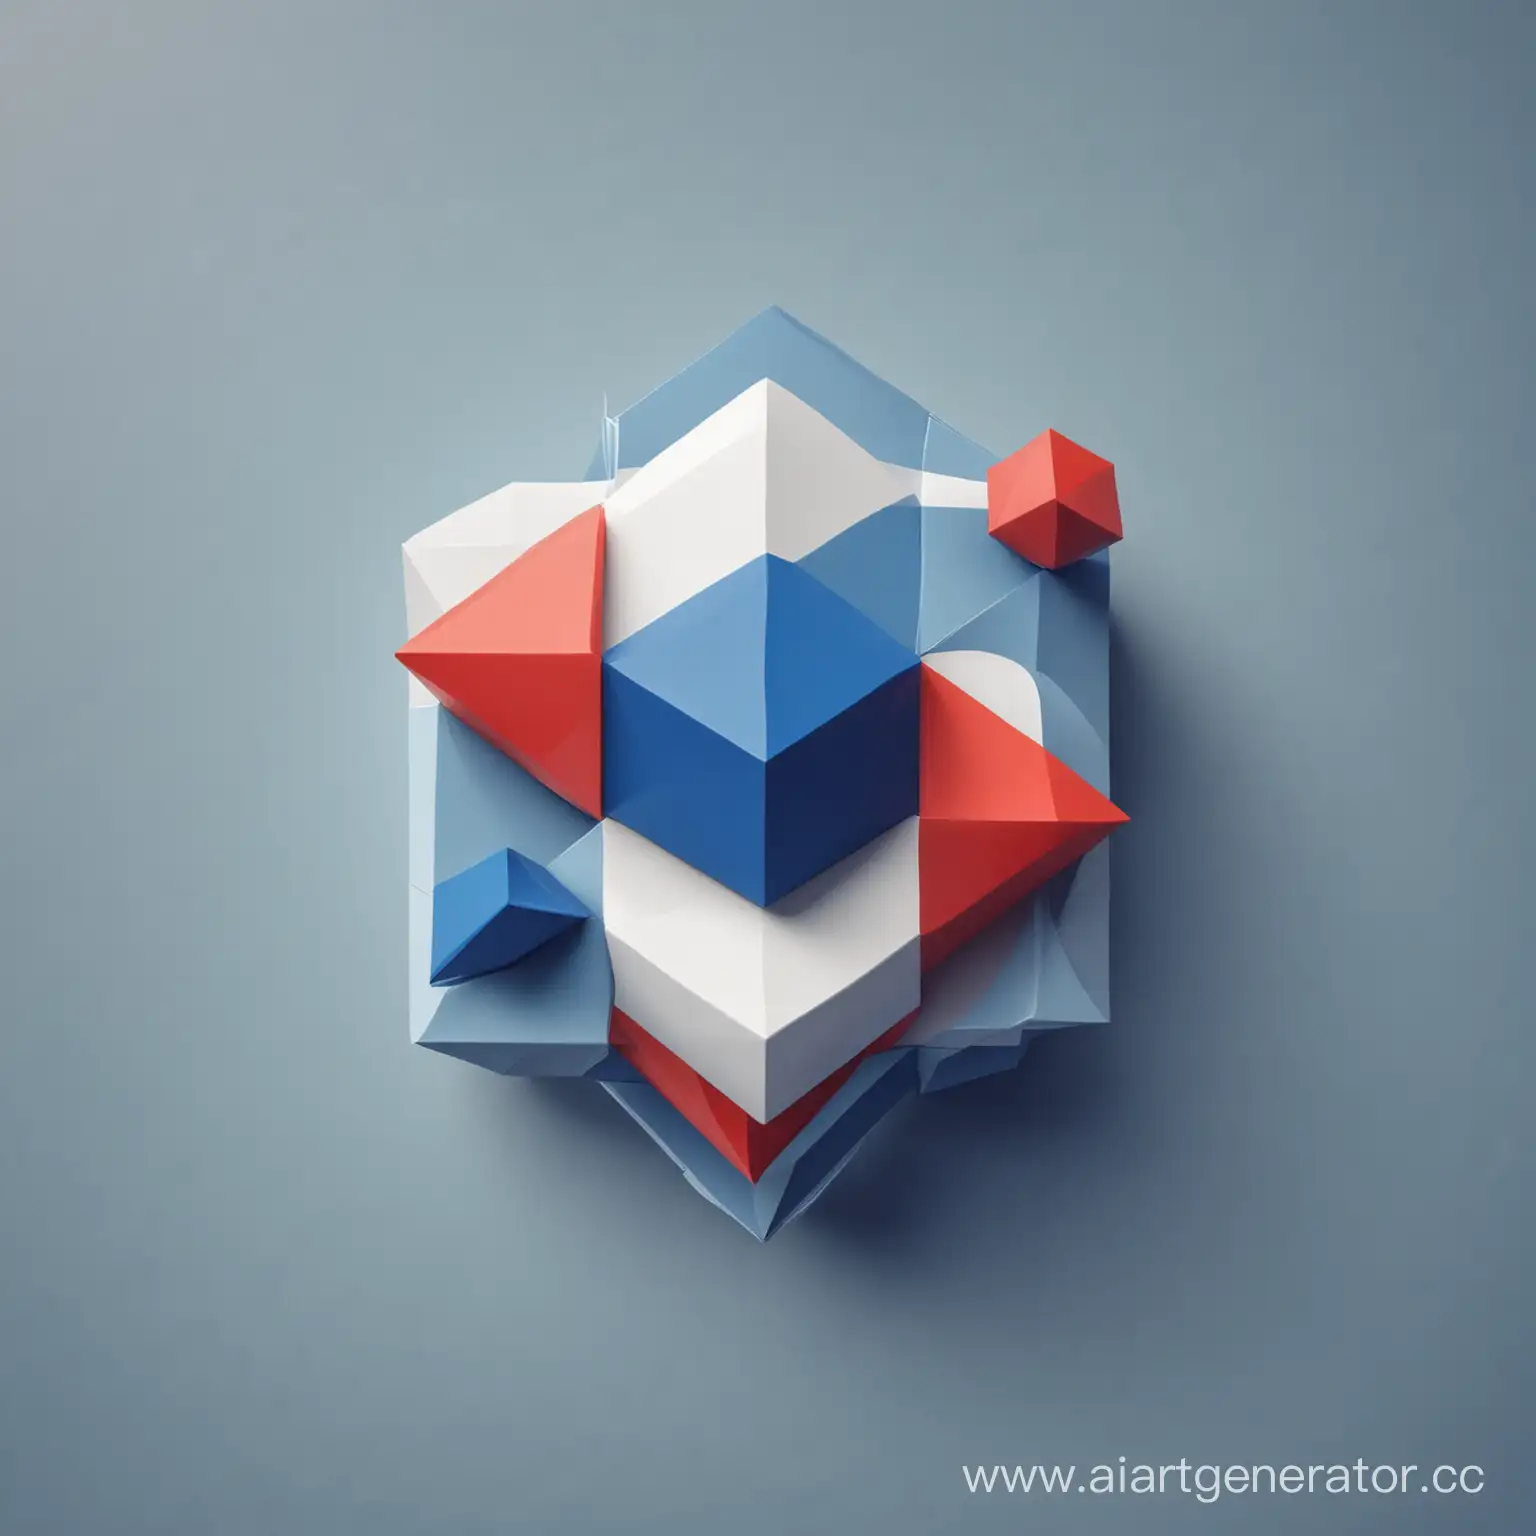 Abstract-Geometric-Programming-Art-in-Blue-White-and-Red